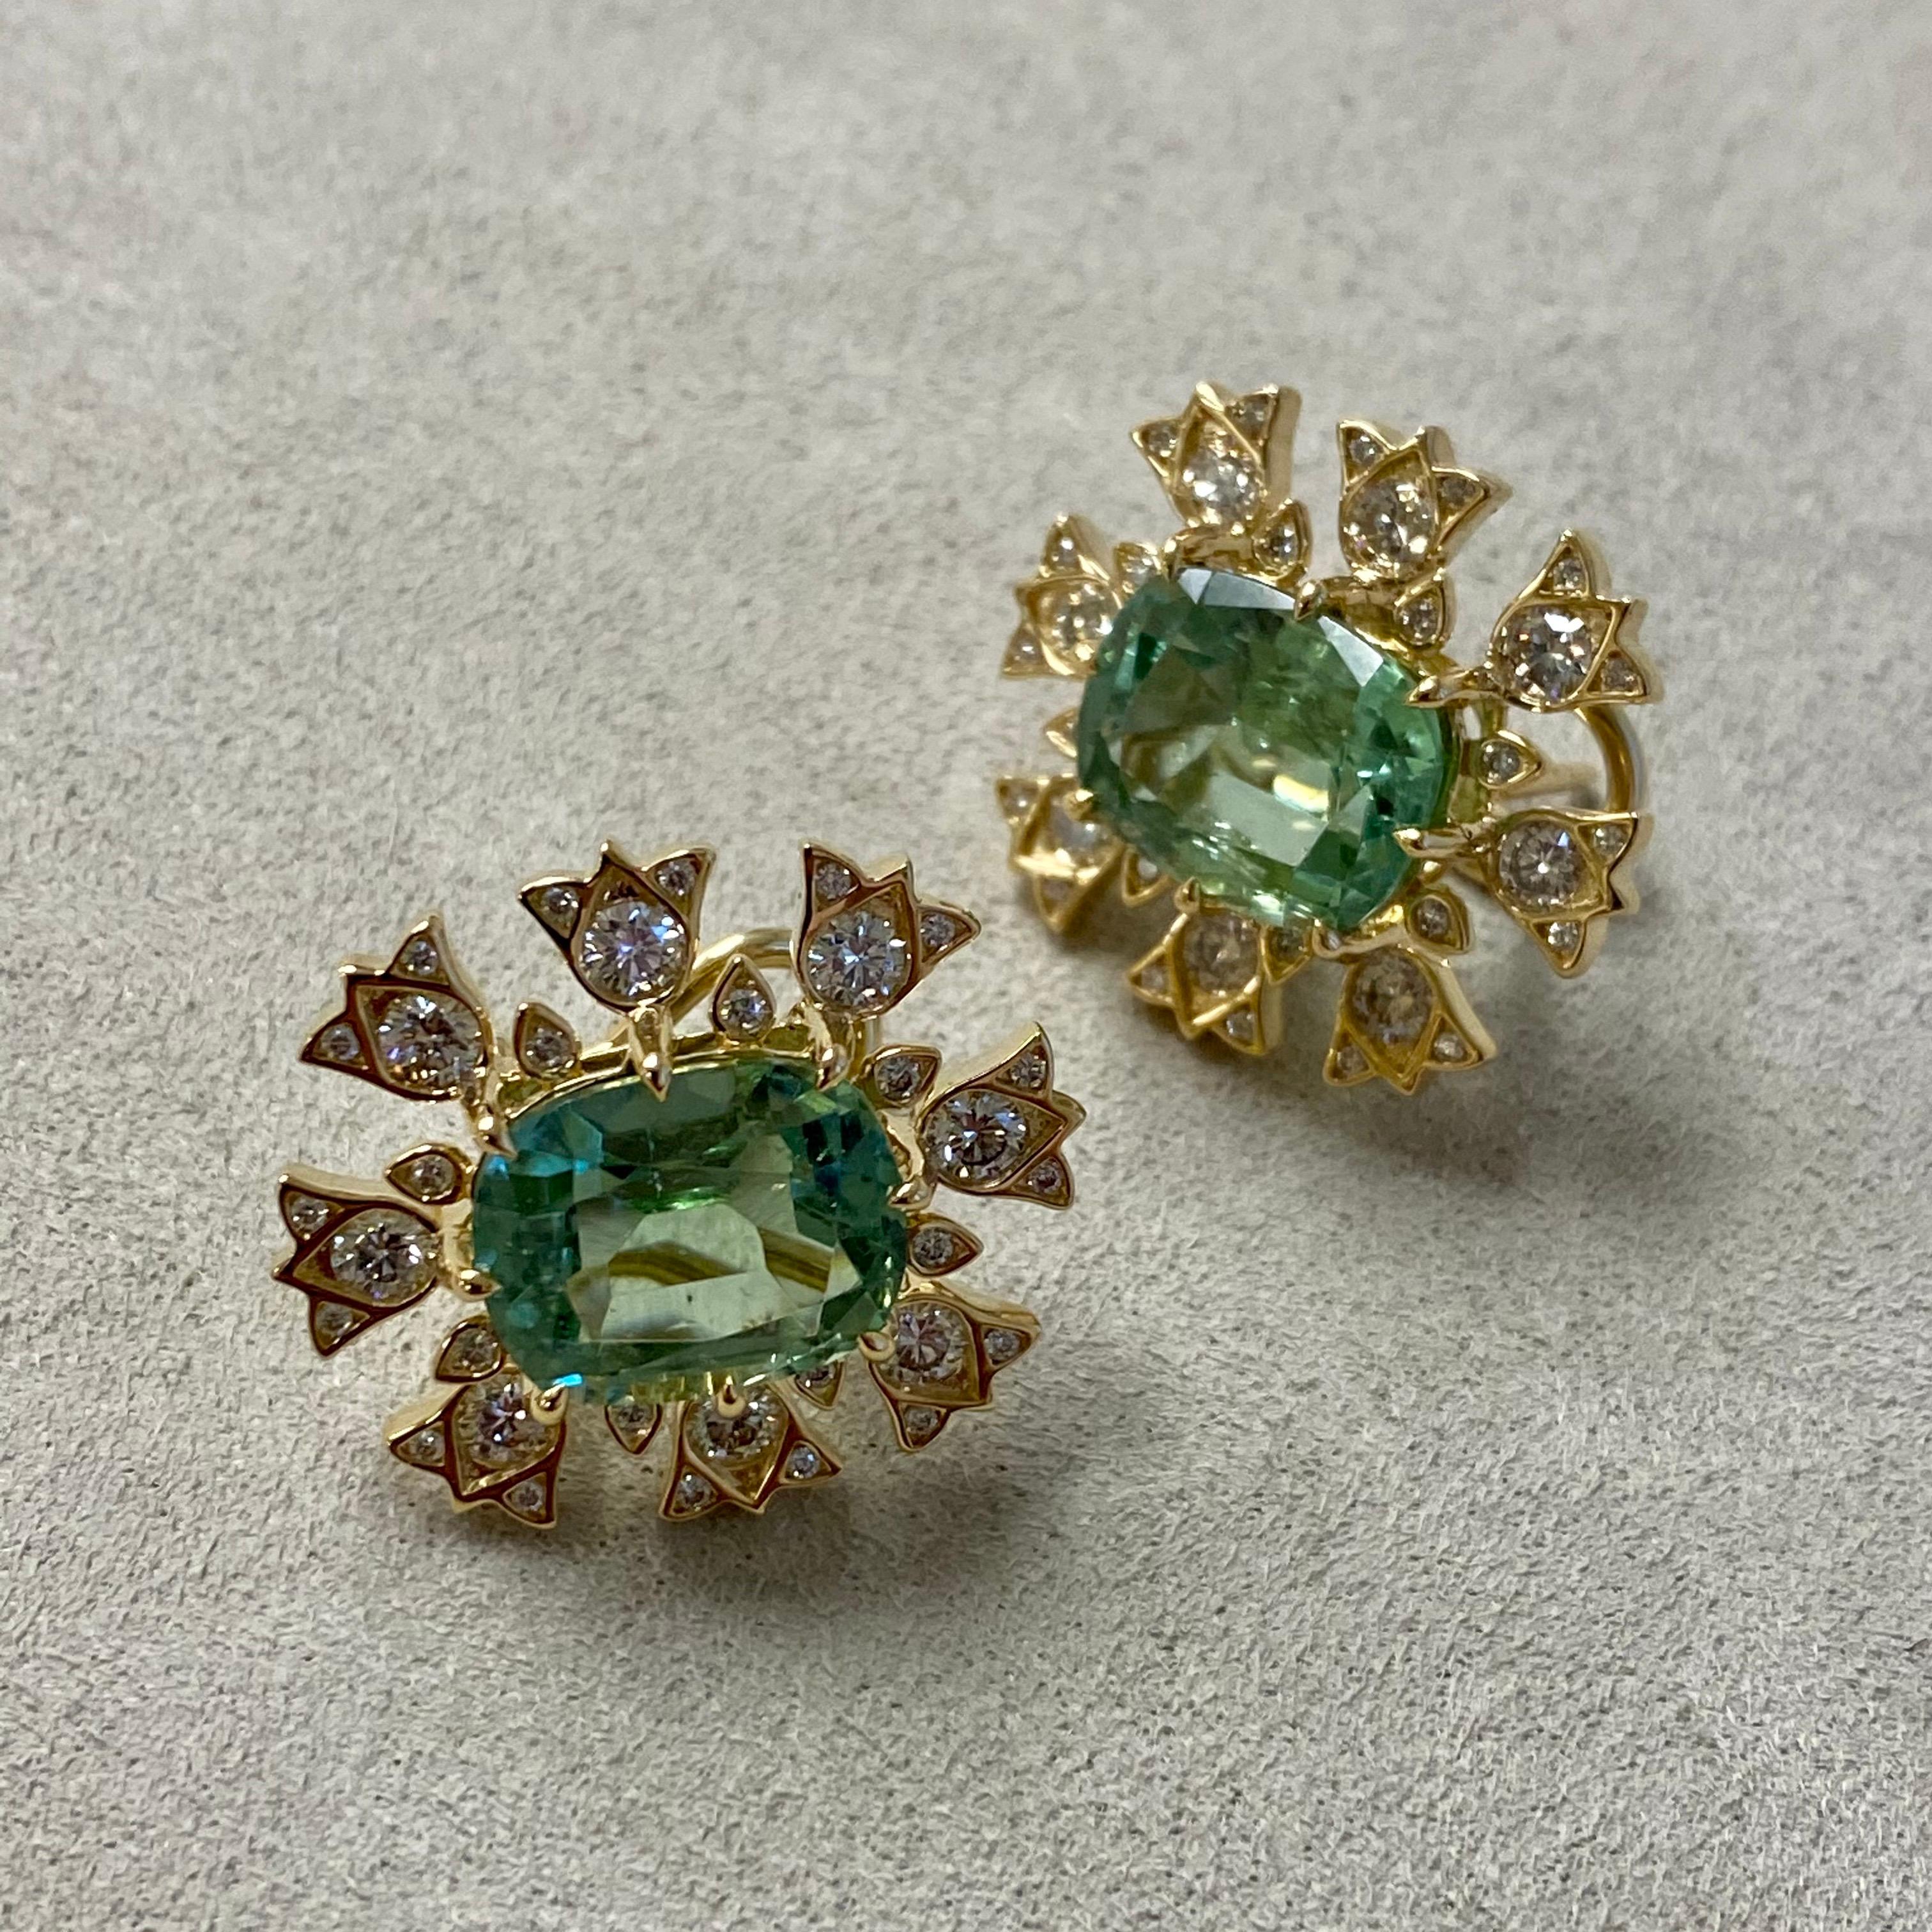 Created in 18 karat yellow gold
Green Tourmaline 9 carats approx.
Diamonds 1.3 carats approx.
Limited edition

Add a touch of luxury to your look with these limited edition earrings. Crafted with 18 karat yellow gold, they feature exquisite